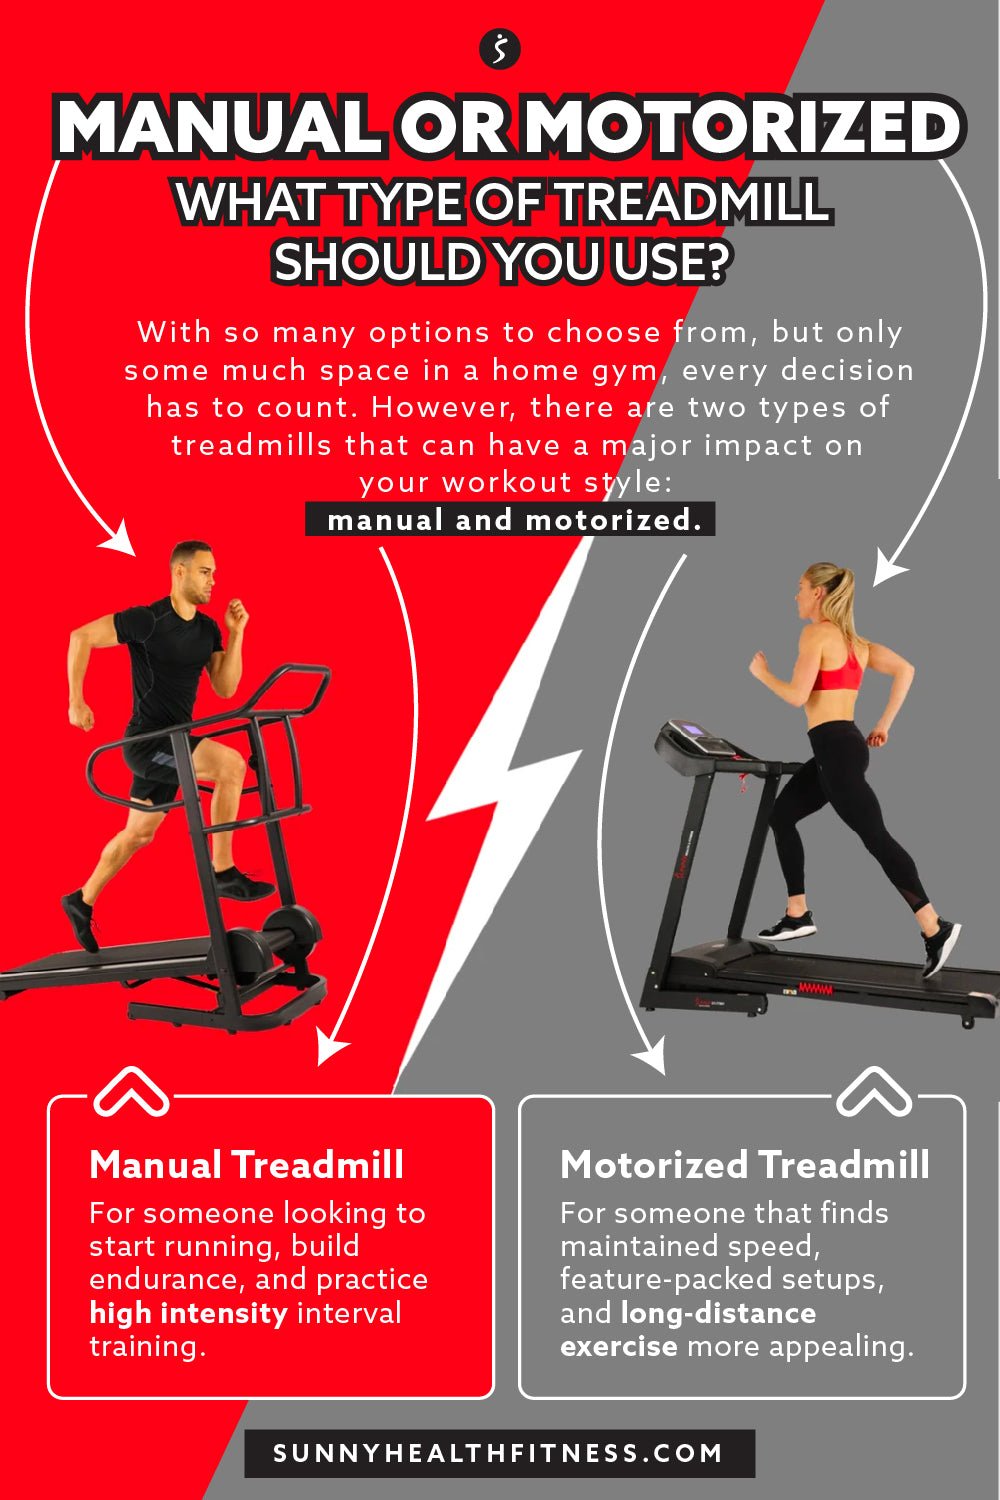 How does a manual treadmill work